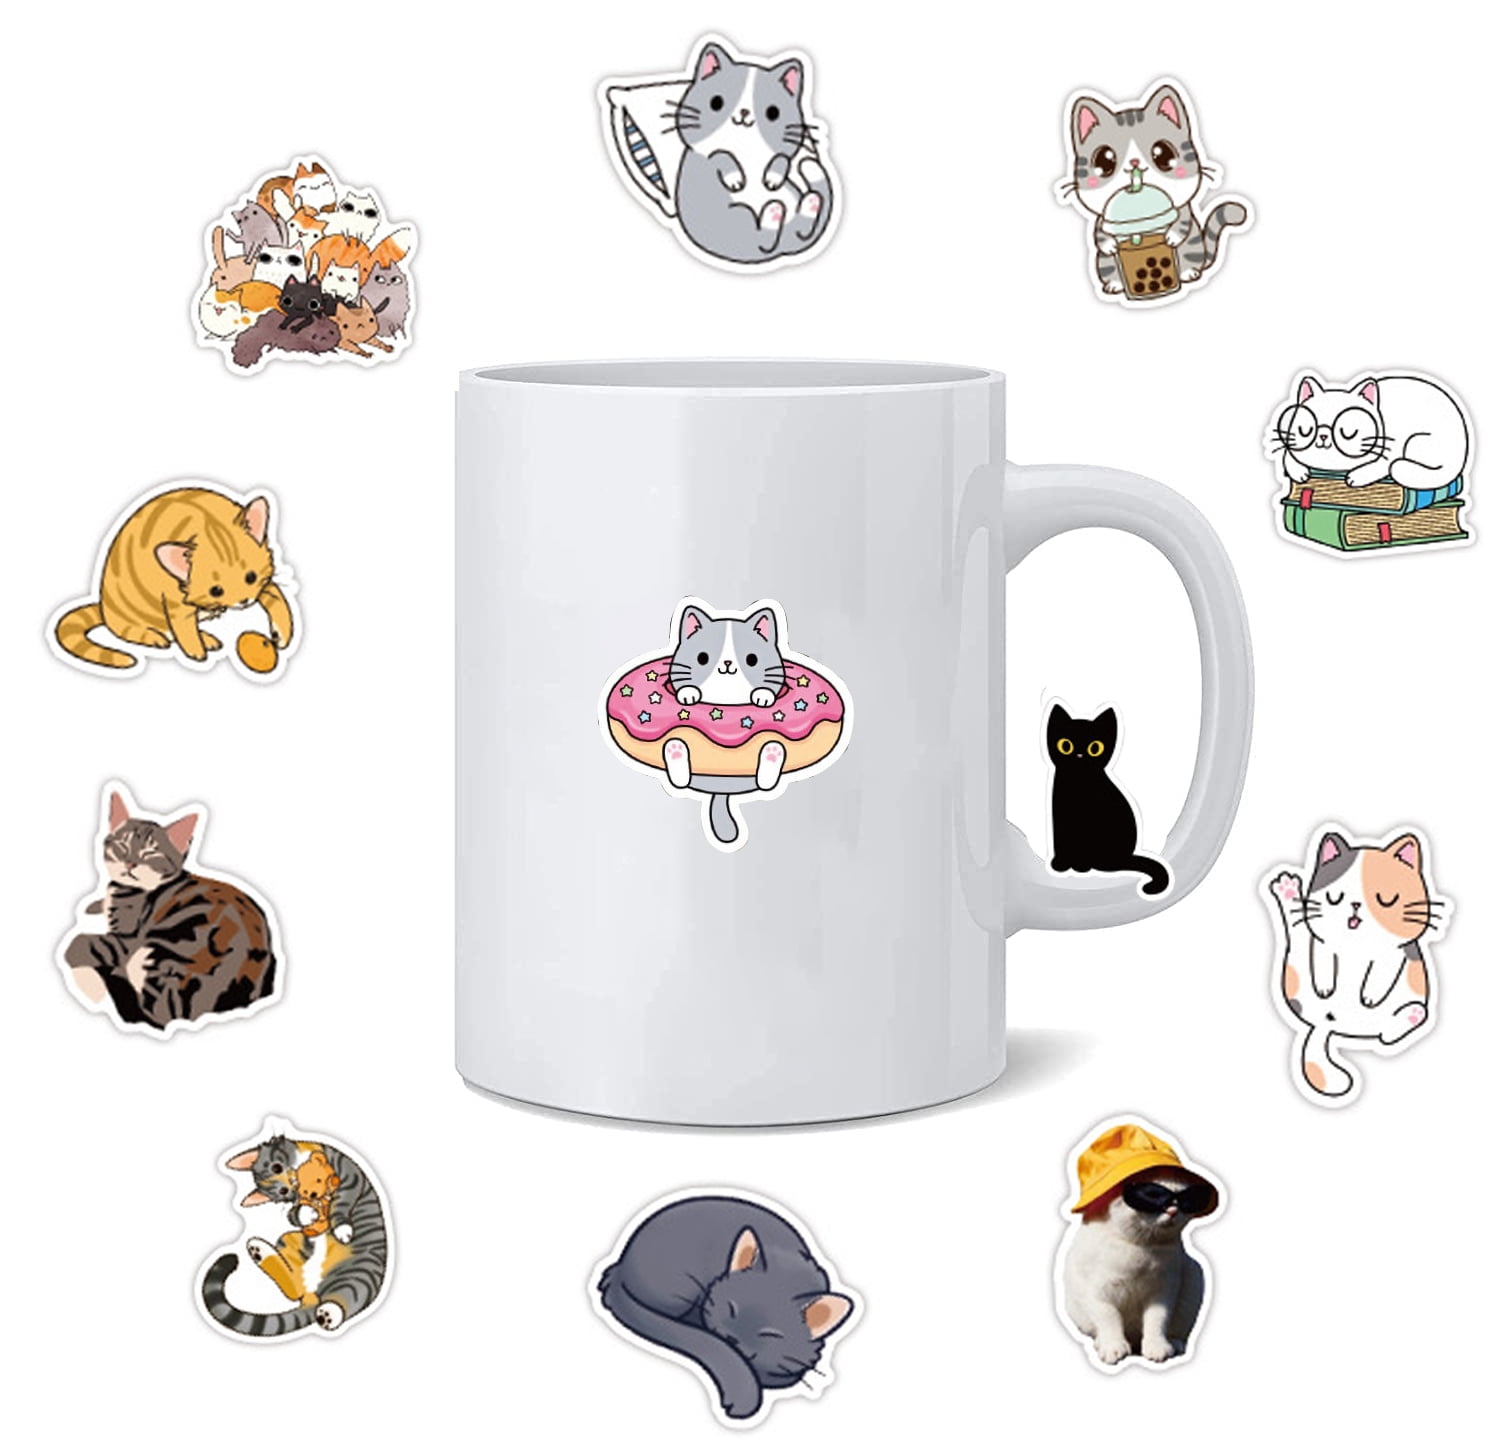 Cute Cat Cute Cat Stickers Graffiti Animal Decals DIY For Laptop Skateboard  Bike Car Luggage Guitar Mug Toys Gifts For All People Home Decor From  Kg2007, $3.93